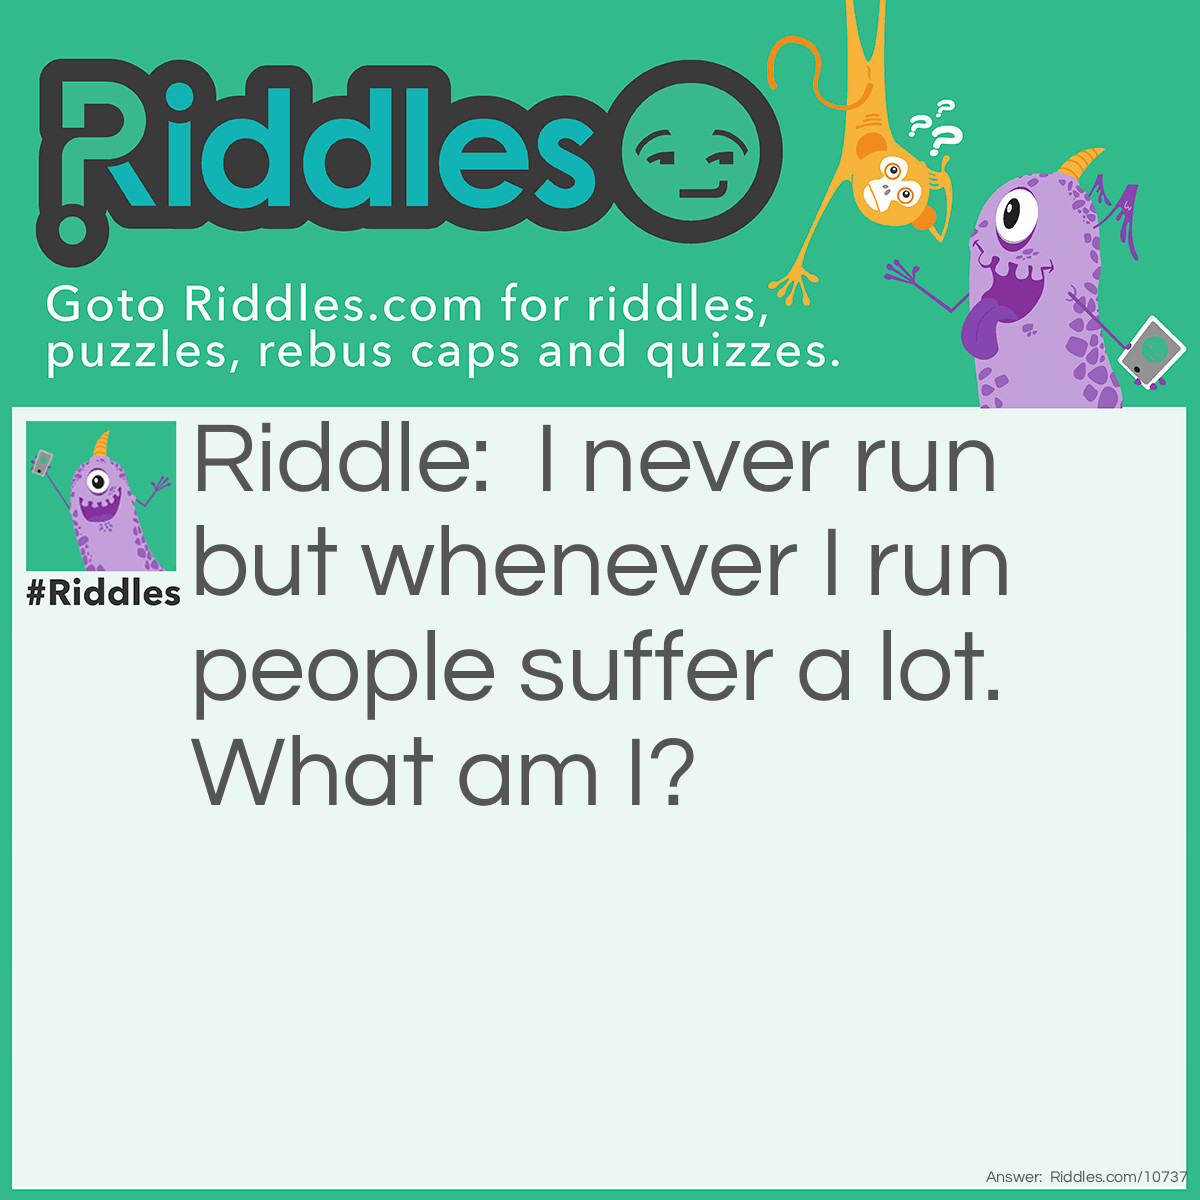 Riddle: I never run but whenever I run people suffer a lot. What am I? Answer: A nose.